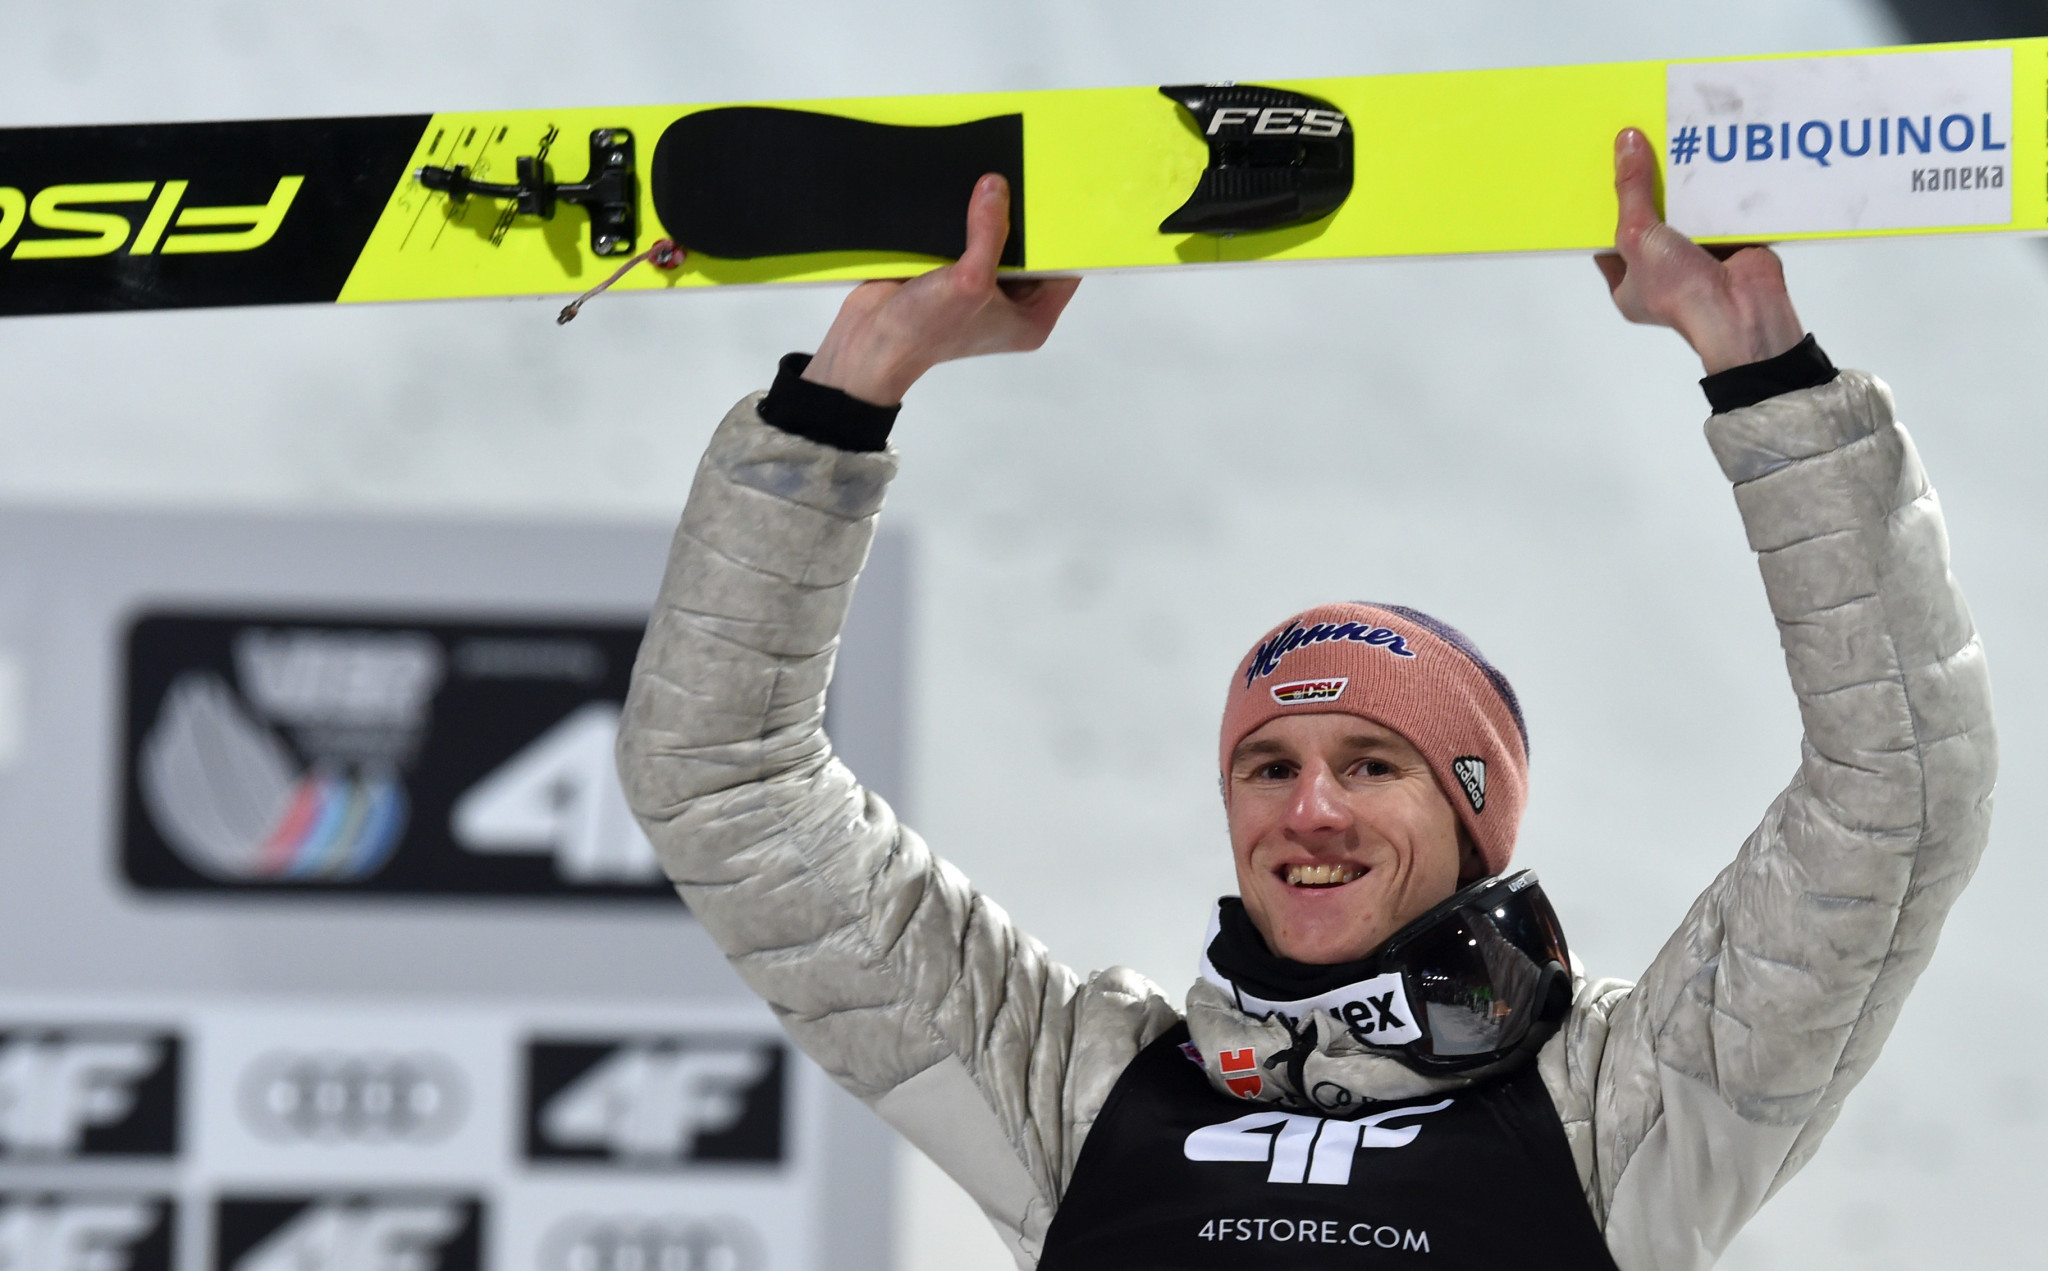 Karl Geiger of Germany continued his excellent form with victory at the FIS Ski Jumping World Cup in Val di Fiemme ©Getty Images